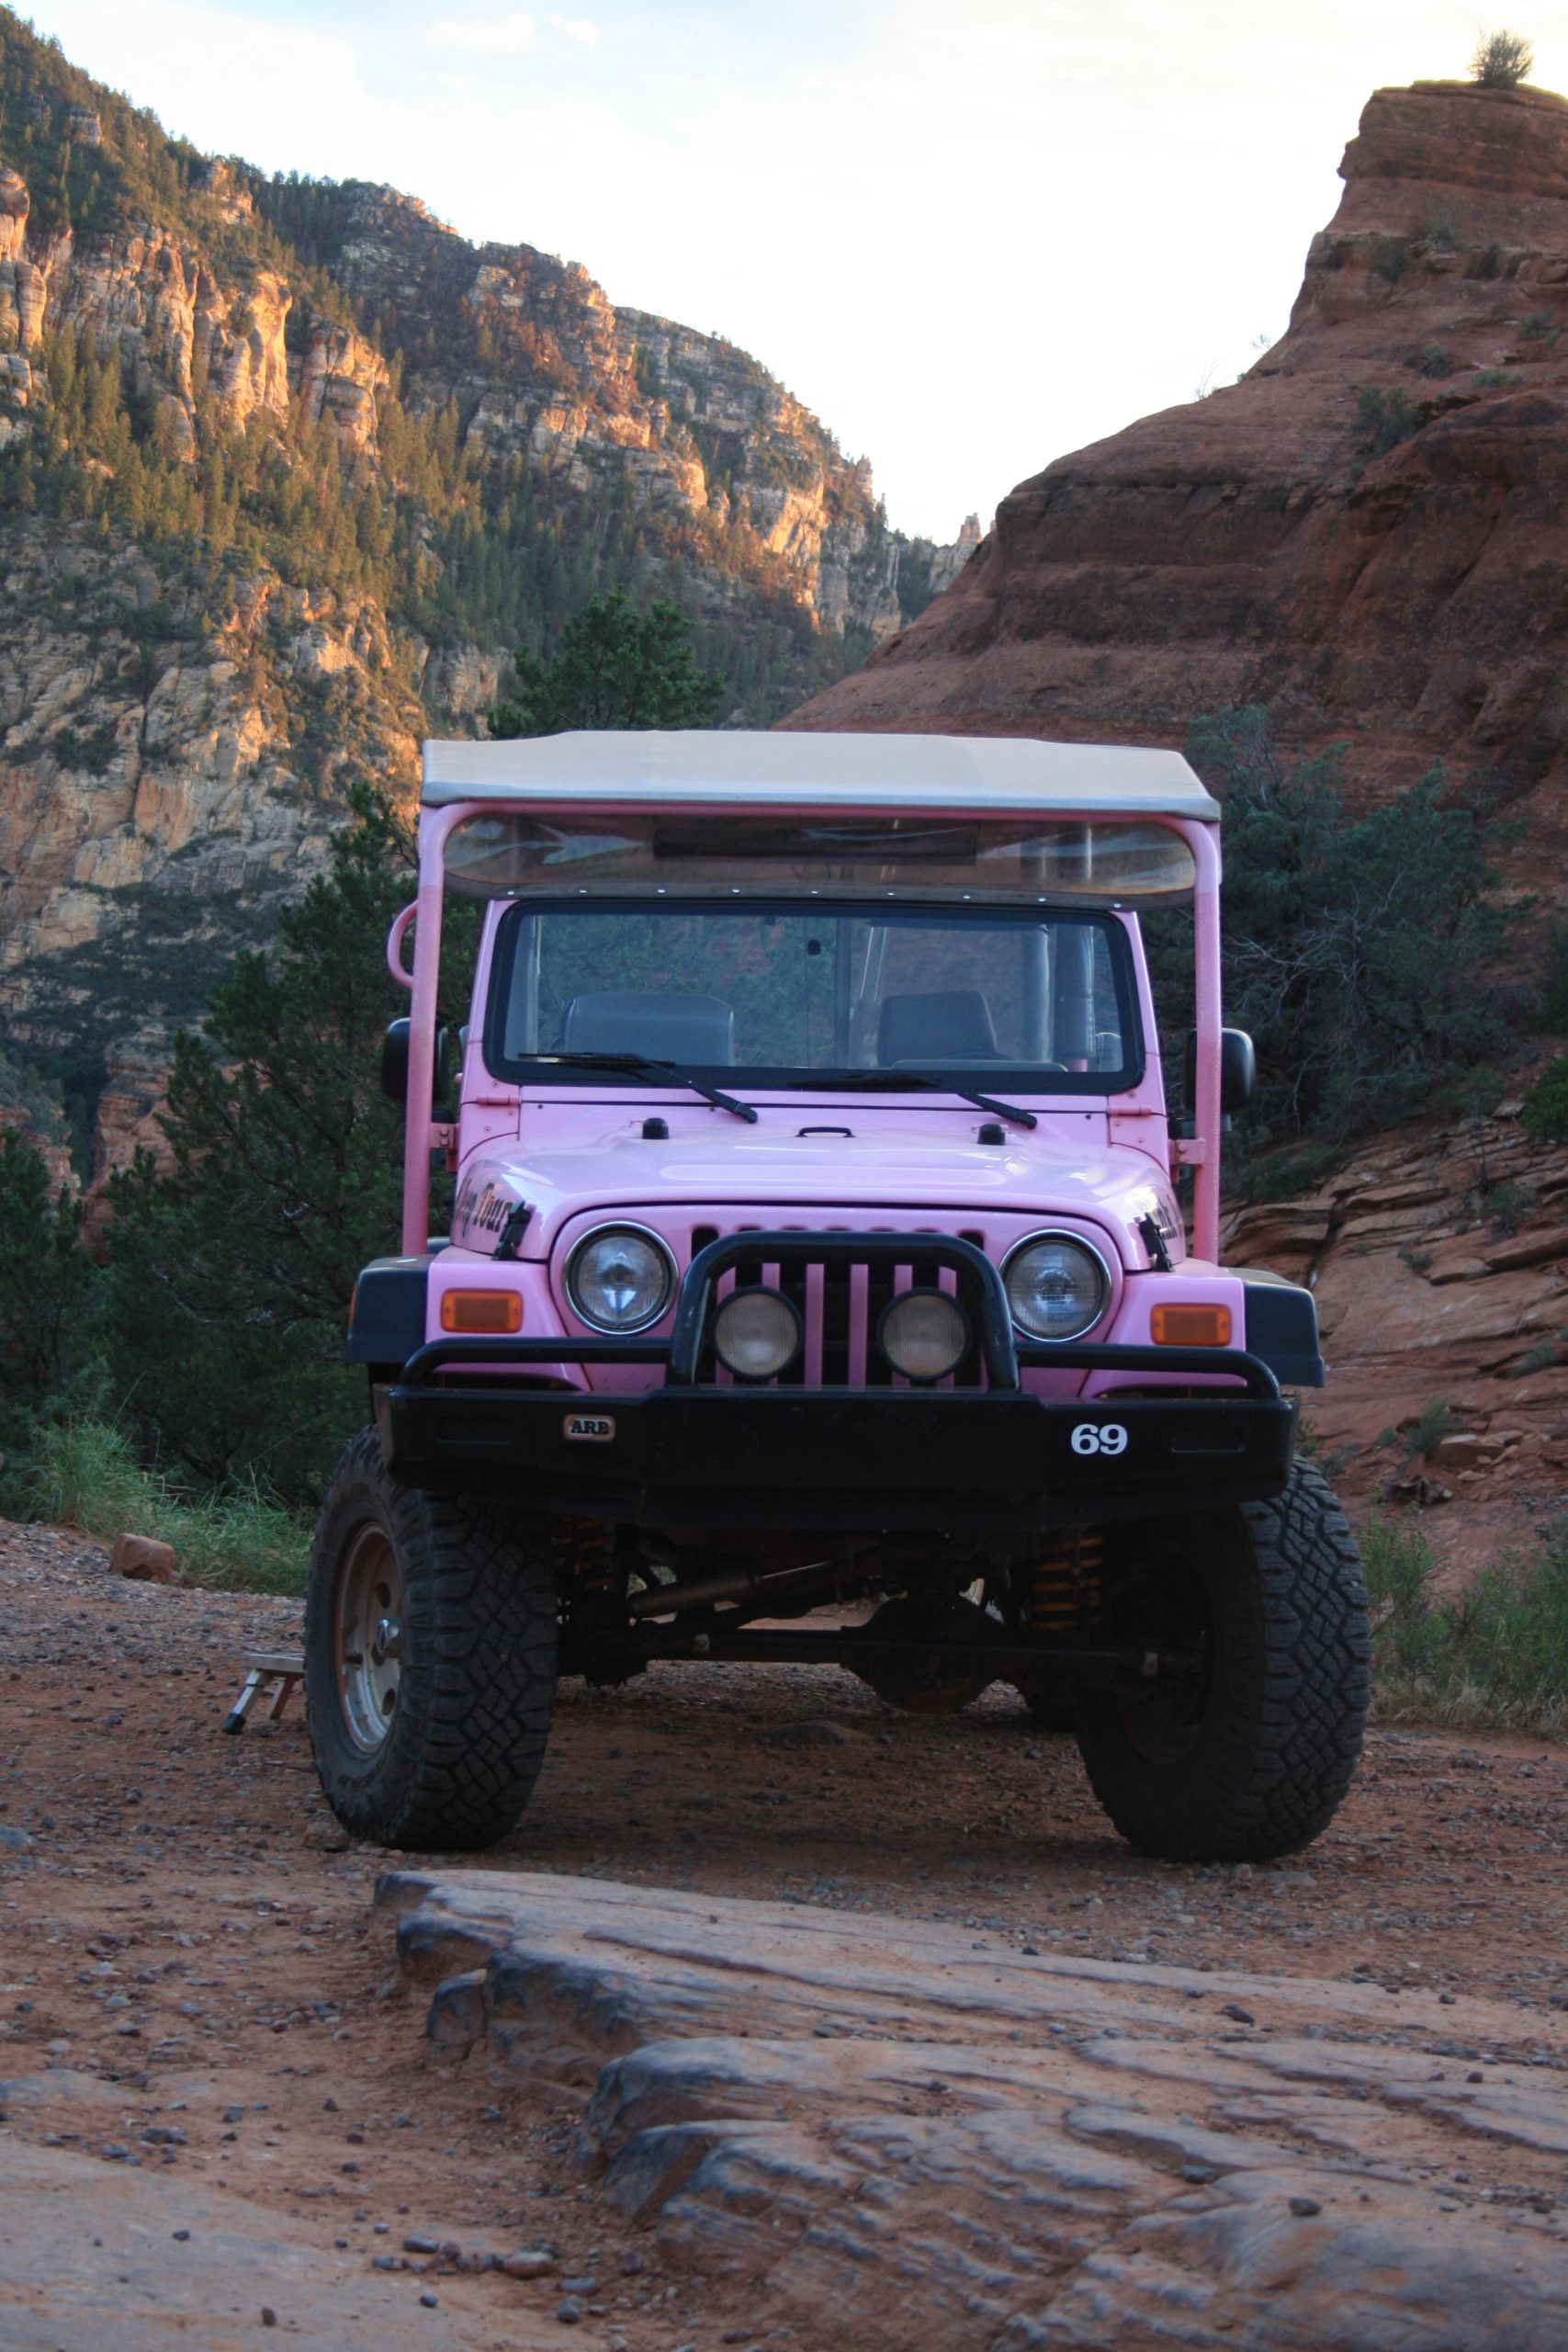 Pink Jeep in Front of Red Rock Landscape at Sunset